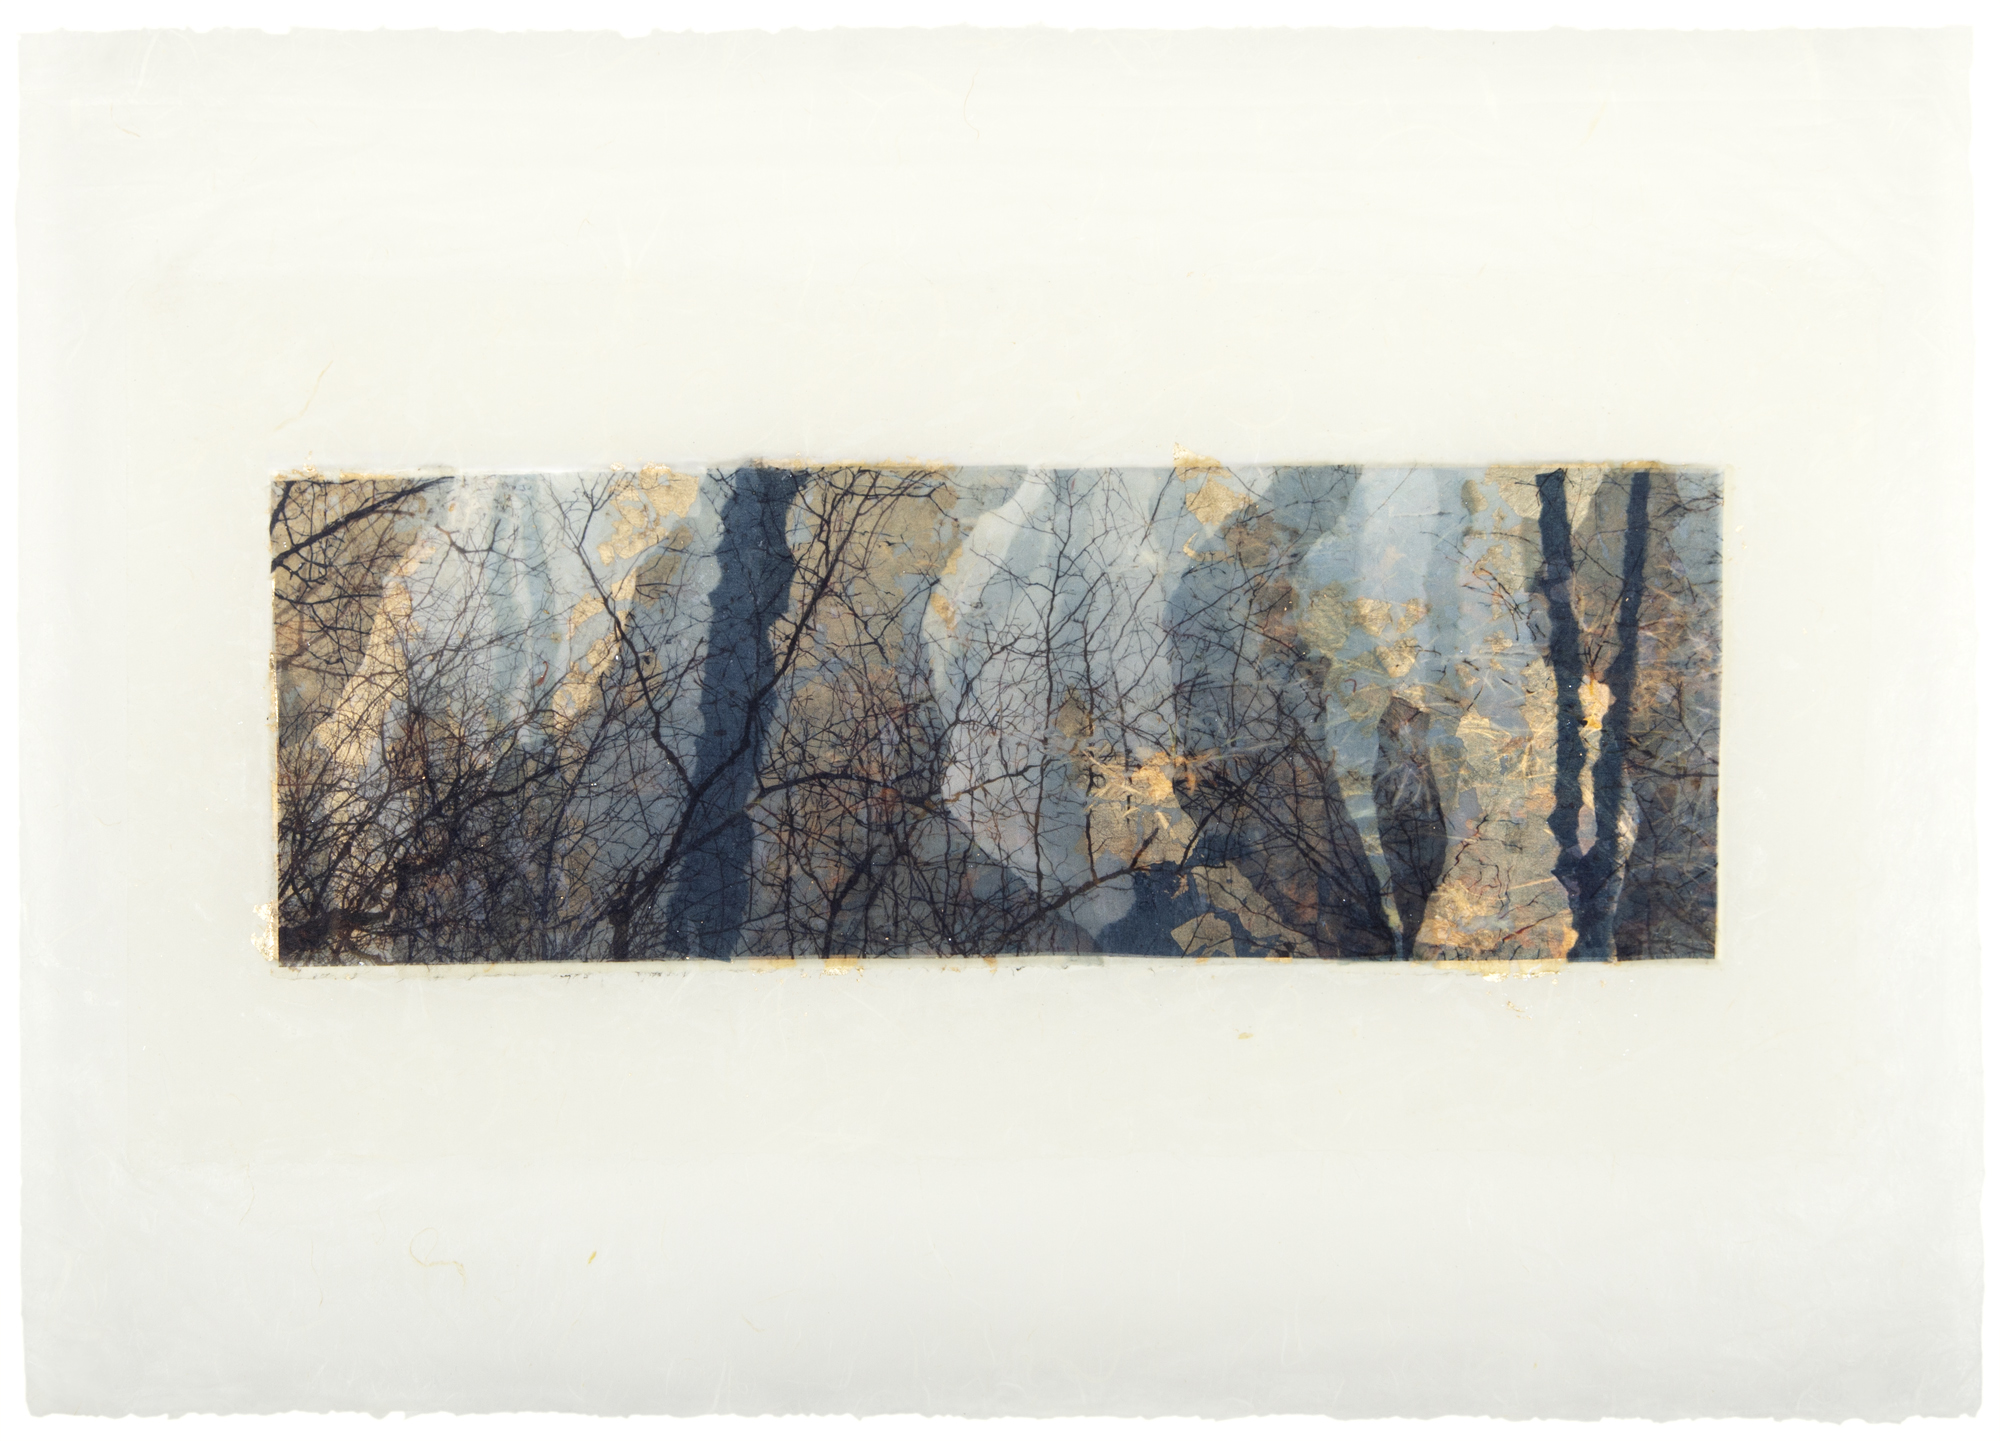   Deep Blue , Long Island, NY, 2014  Ink jet print on Japanese rice paper, rice papers, gold leaf, wax  13” x 28” 